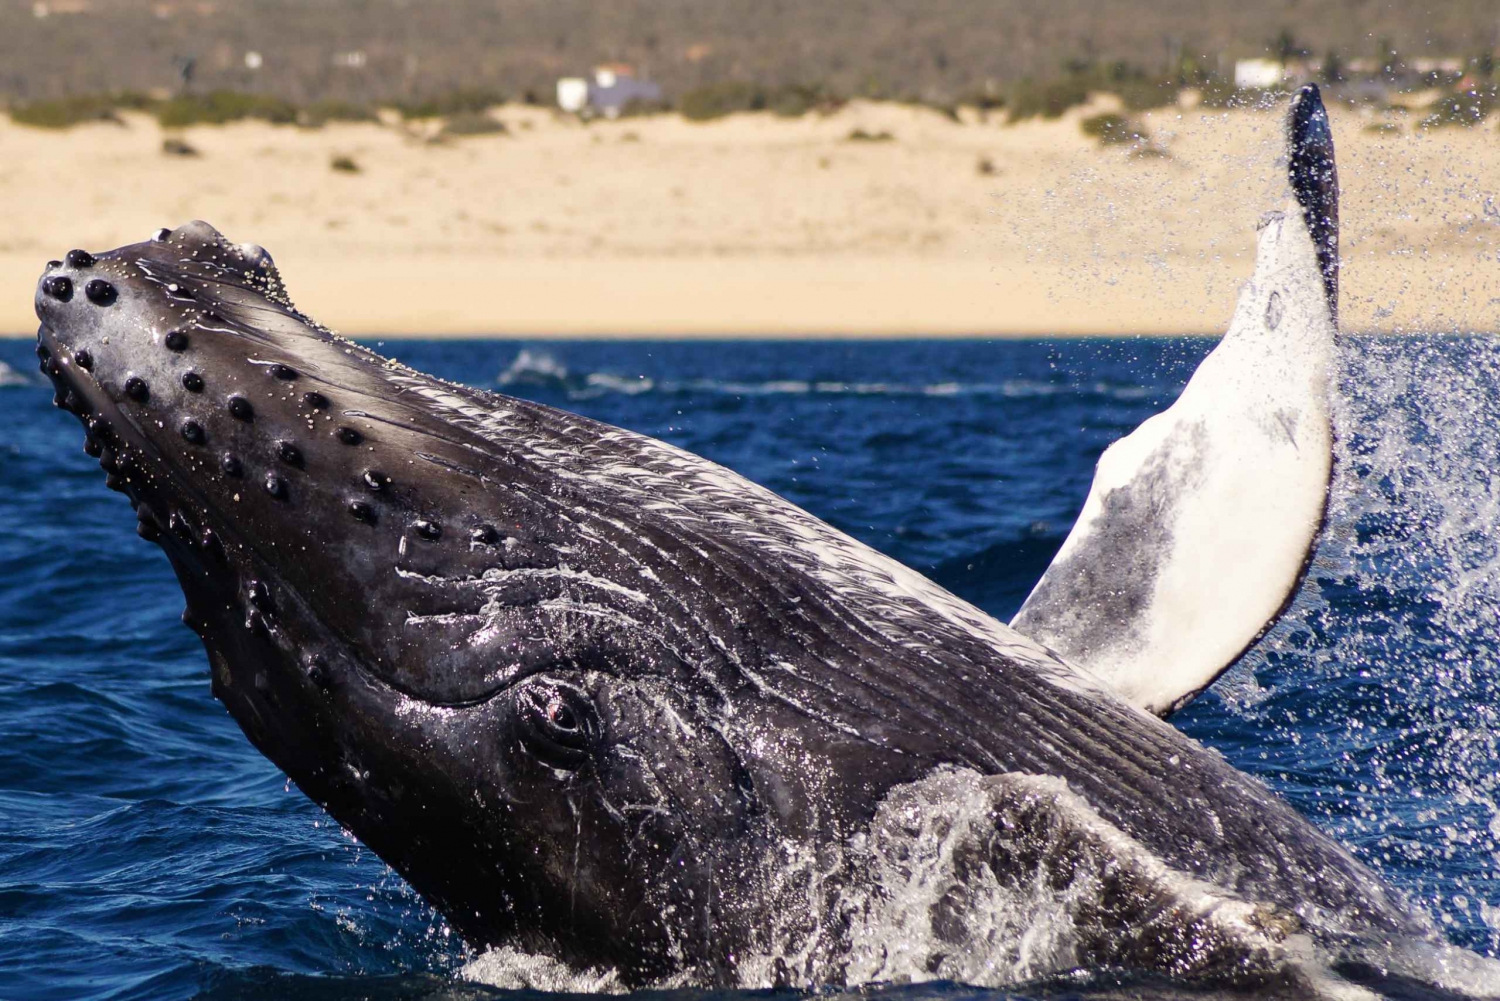 Cabo San Lucas: 2.5-Hour Whale Watching Tour